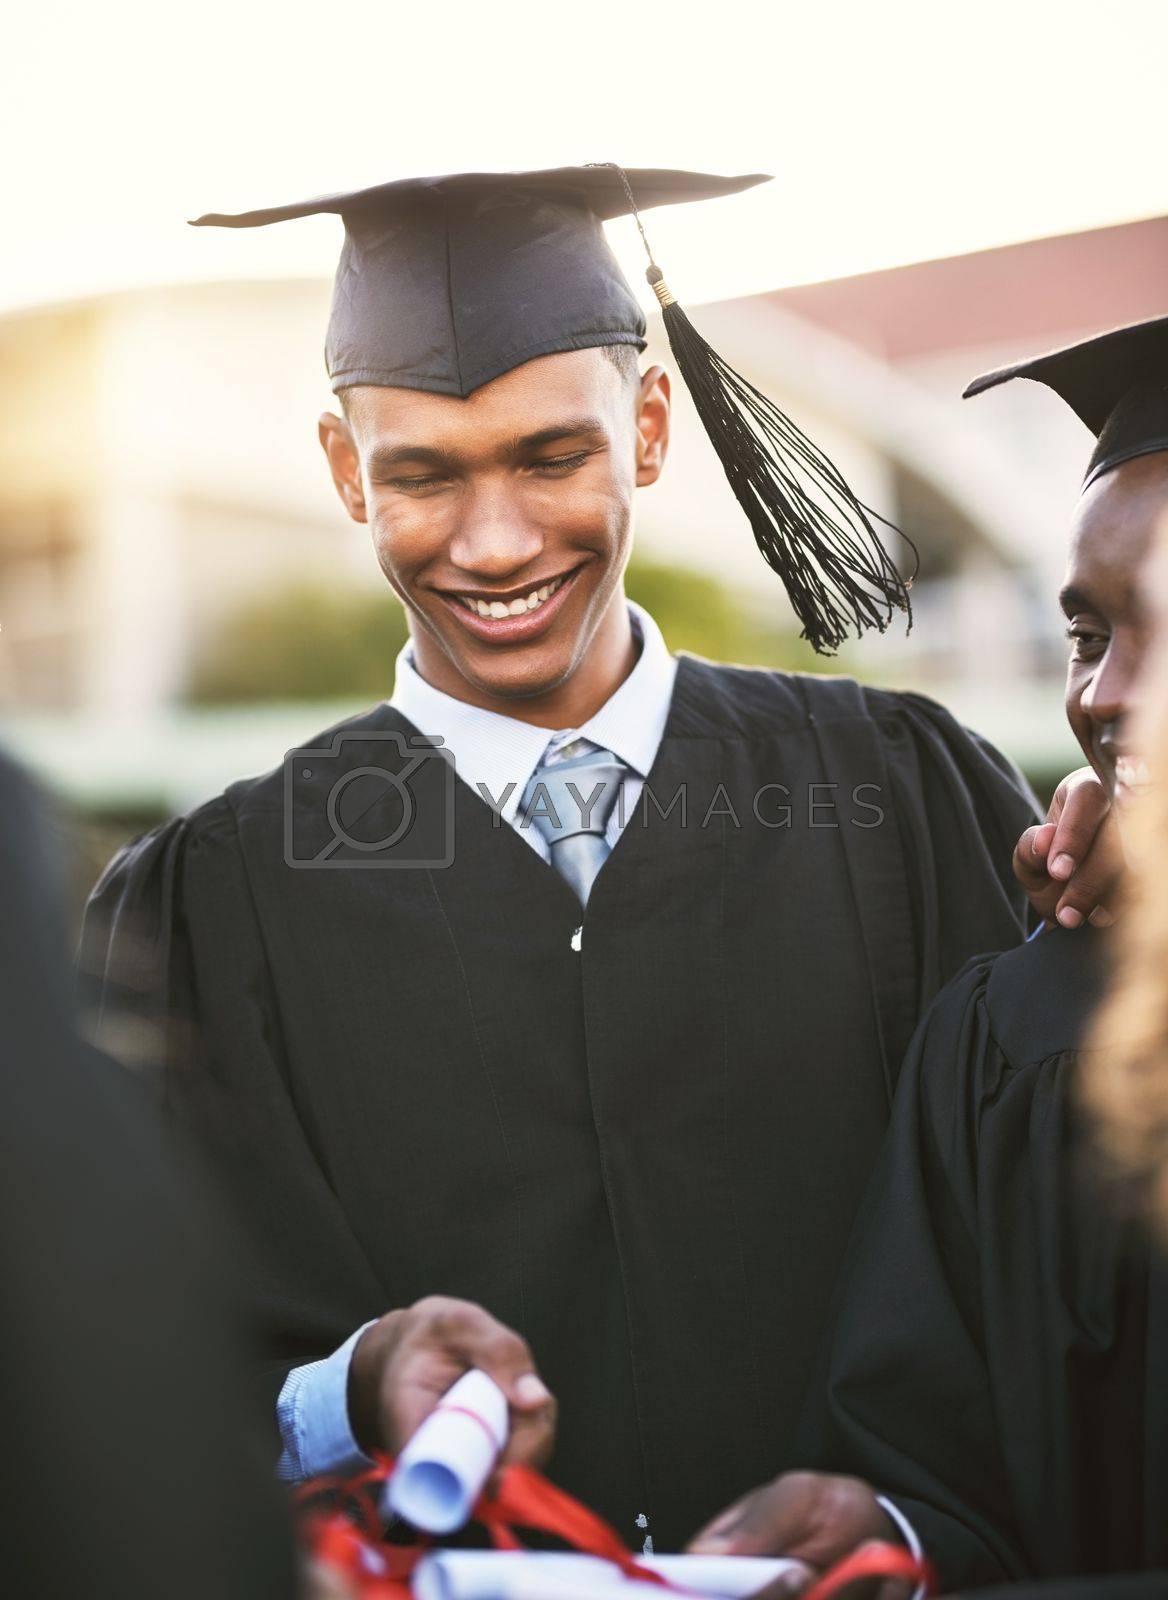 Royalty free image of Education is the key to success. a group of students holding their diplomas together on graduation day. by YuriArcurs